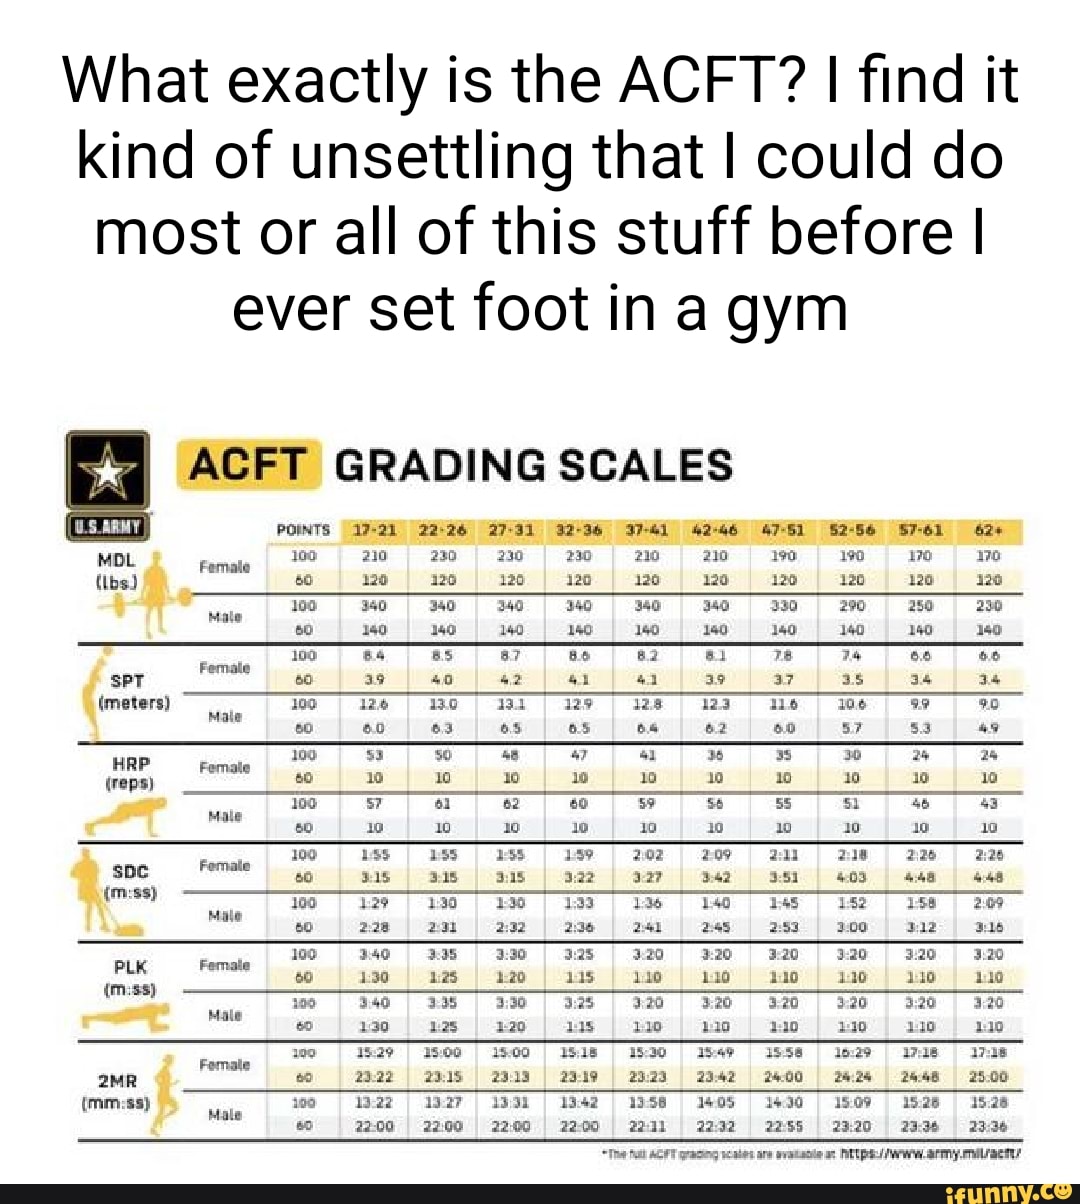 What exactly is the ACFT? I find it kind of unsettling that I could do